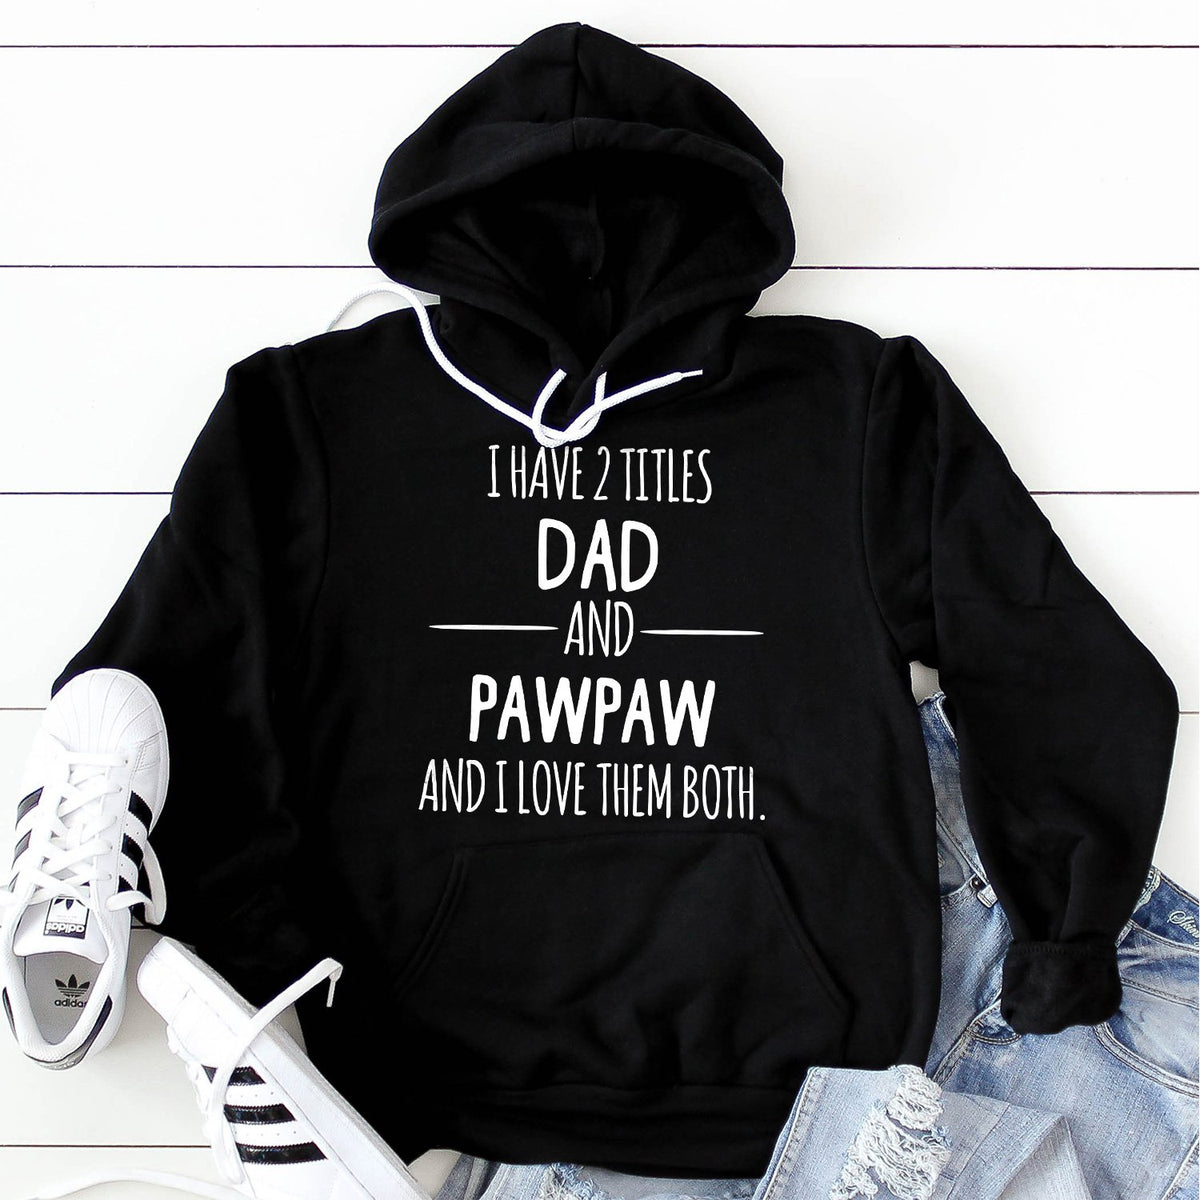 I Have 2 Titles Dad and PawPaw and I Love Them Both - Hoodie Sweatshirt